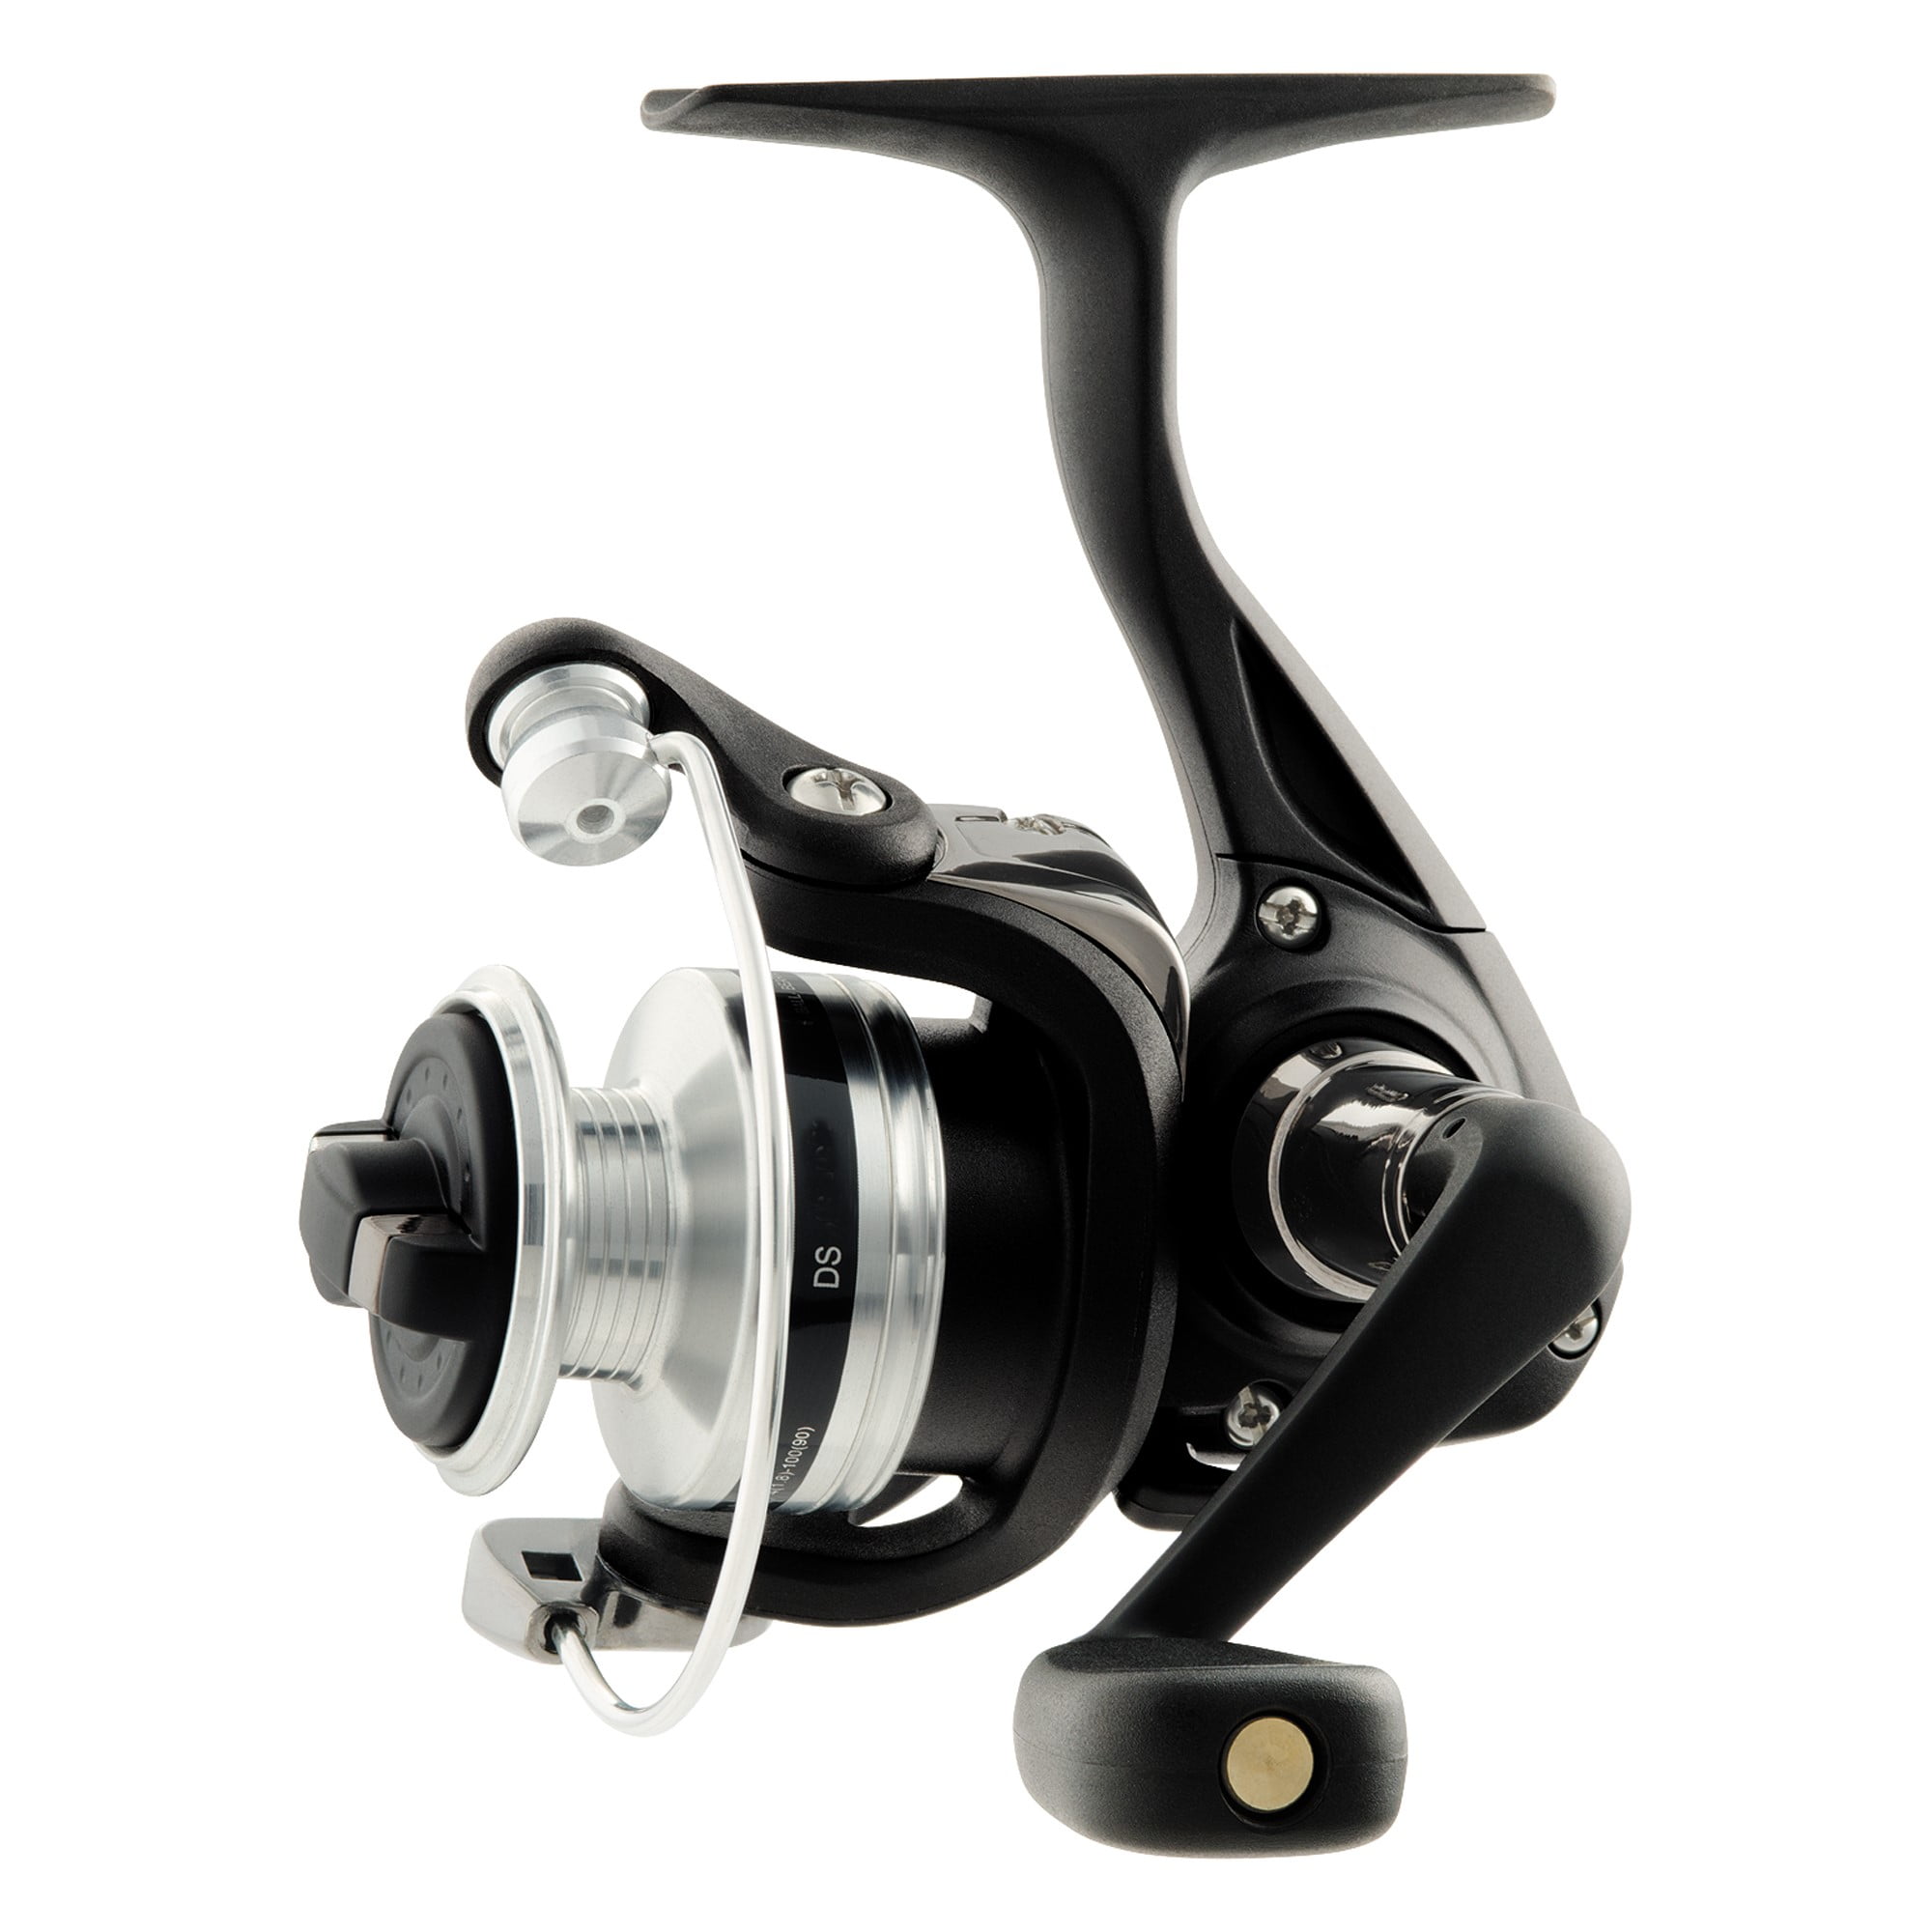 Daiwa D-Spin Ultralight Spinning Reel, 500, 4.9:1 Gear Ratio, 1BB, 4.40lb  Max Drag, Ambidextrous, Clam Package